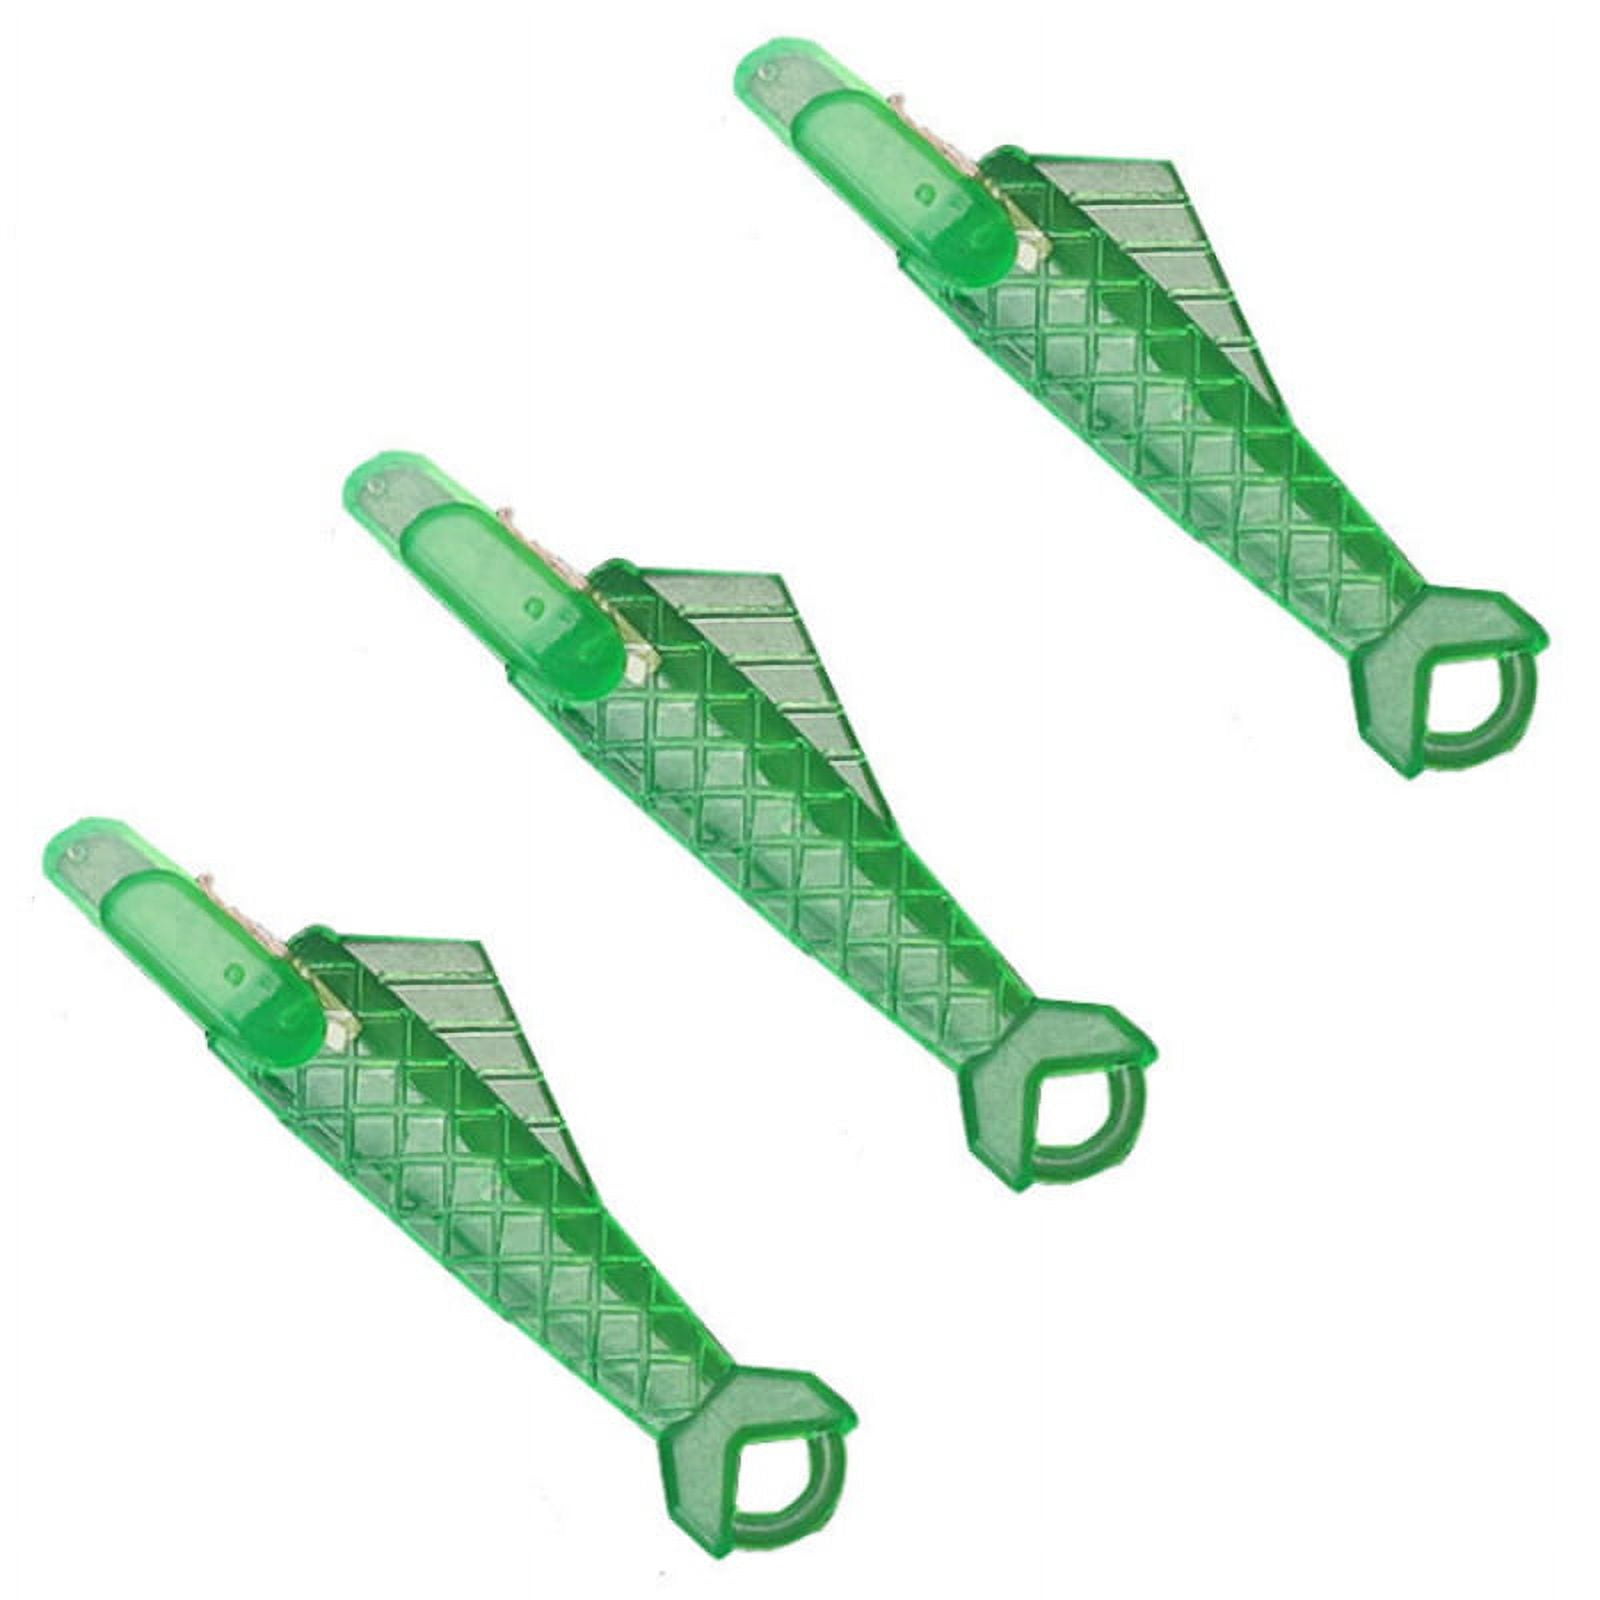 ZYDZ 20 Pack Needle Threader for Sewing Machine, Fish Type Automatic  Inserter Small Eyes Needles Threader Tool, Green